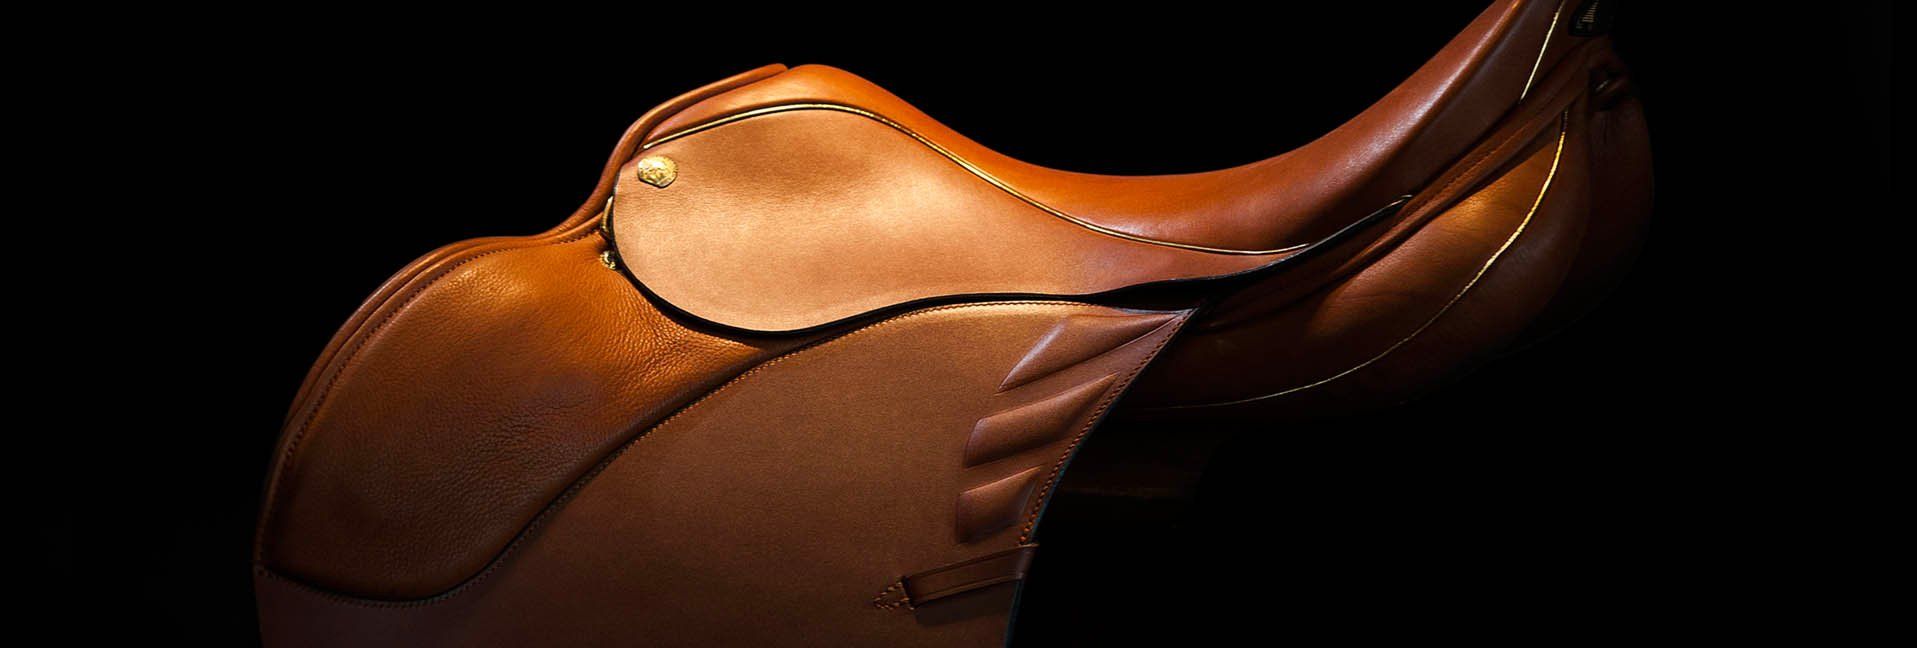 How Does Your Saddle Fit? It’s about more than comfort for horse and rider